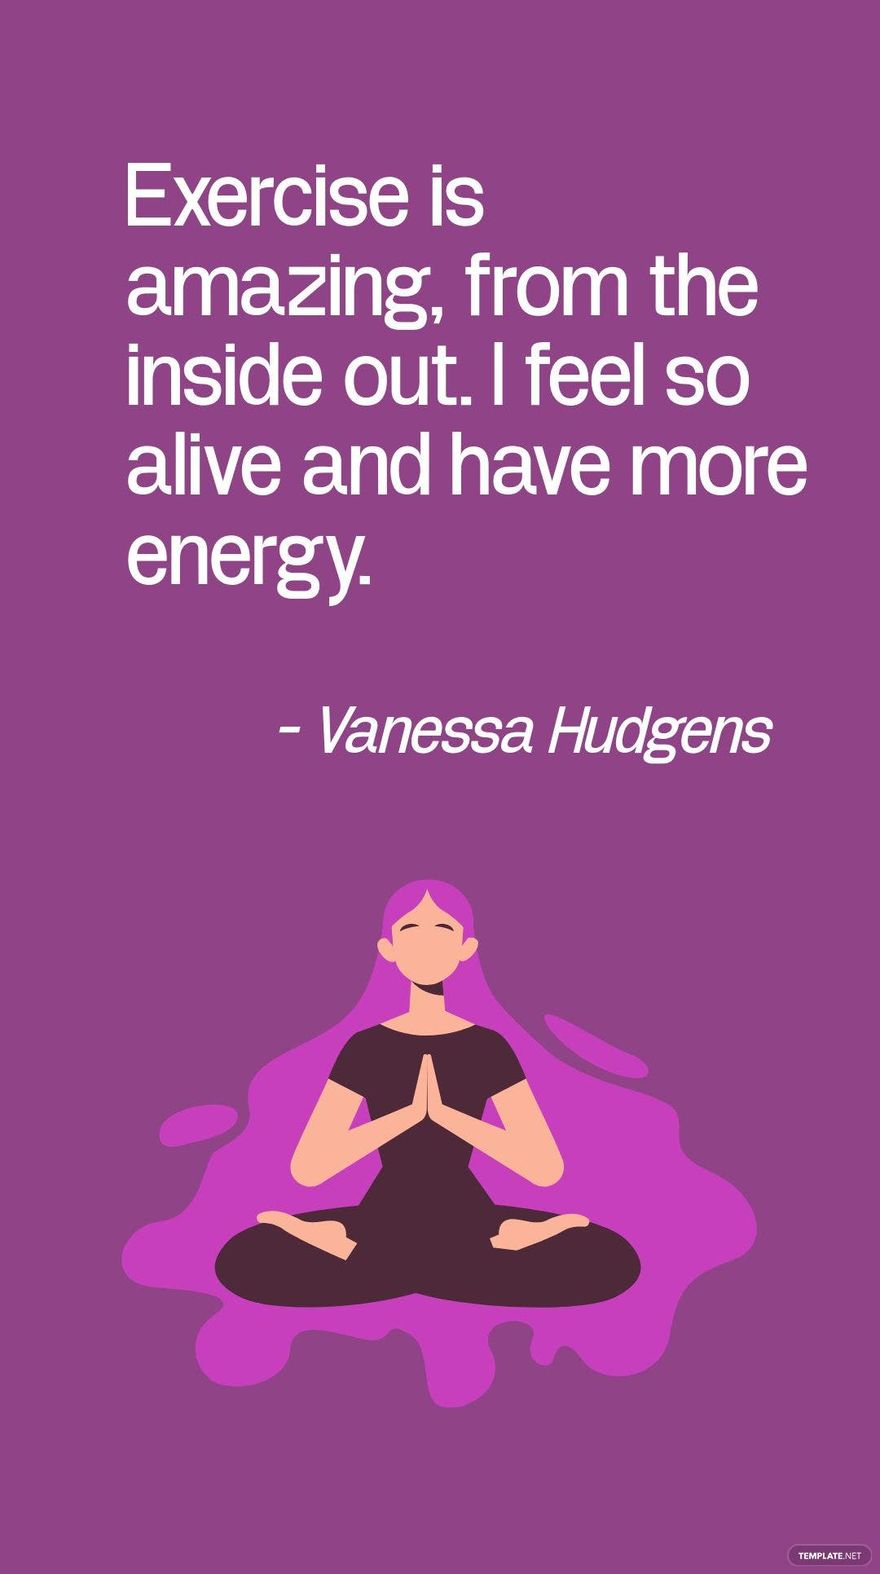 Vanessa Hudgens - Exercise is amazing, from the inside out. I feel so alive and have more energy. in JPG